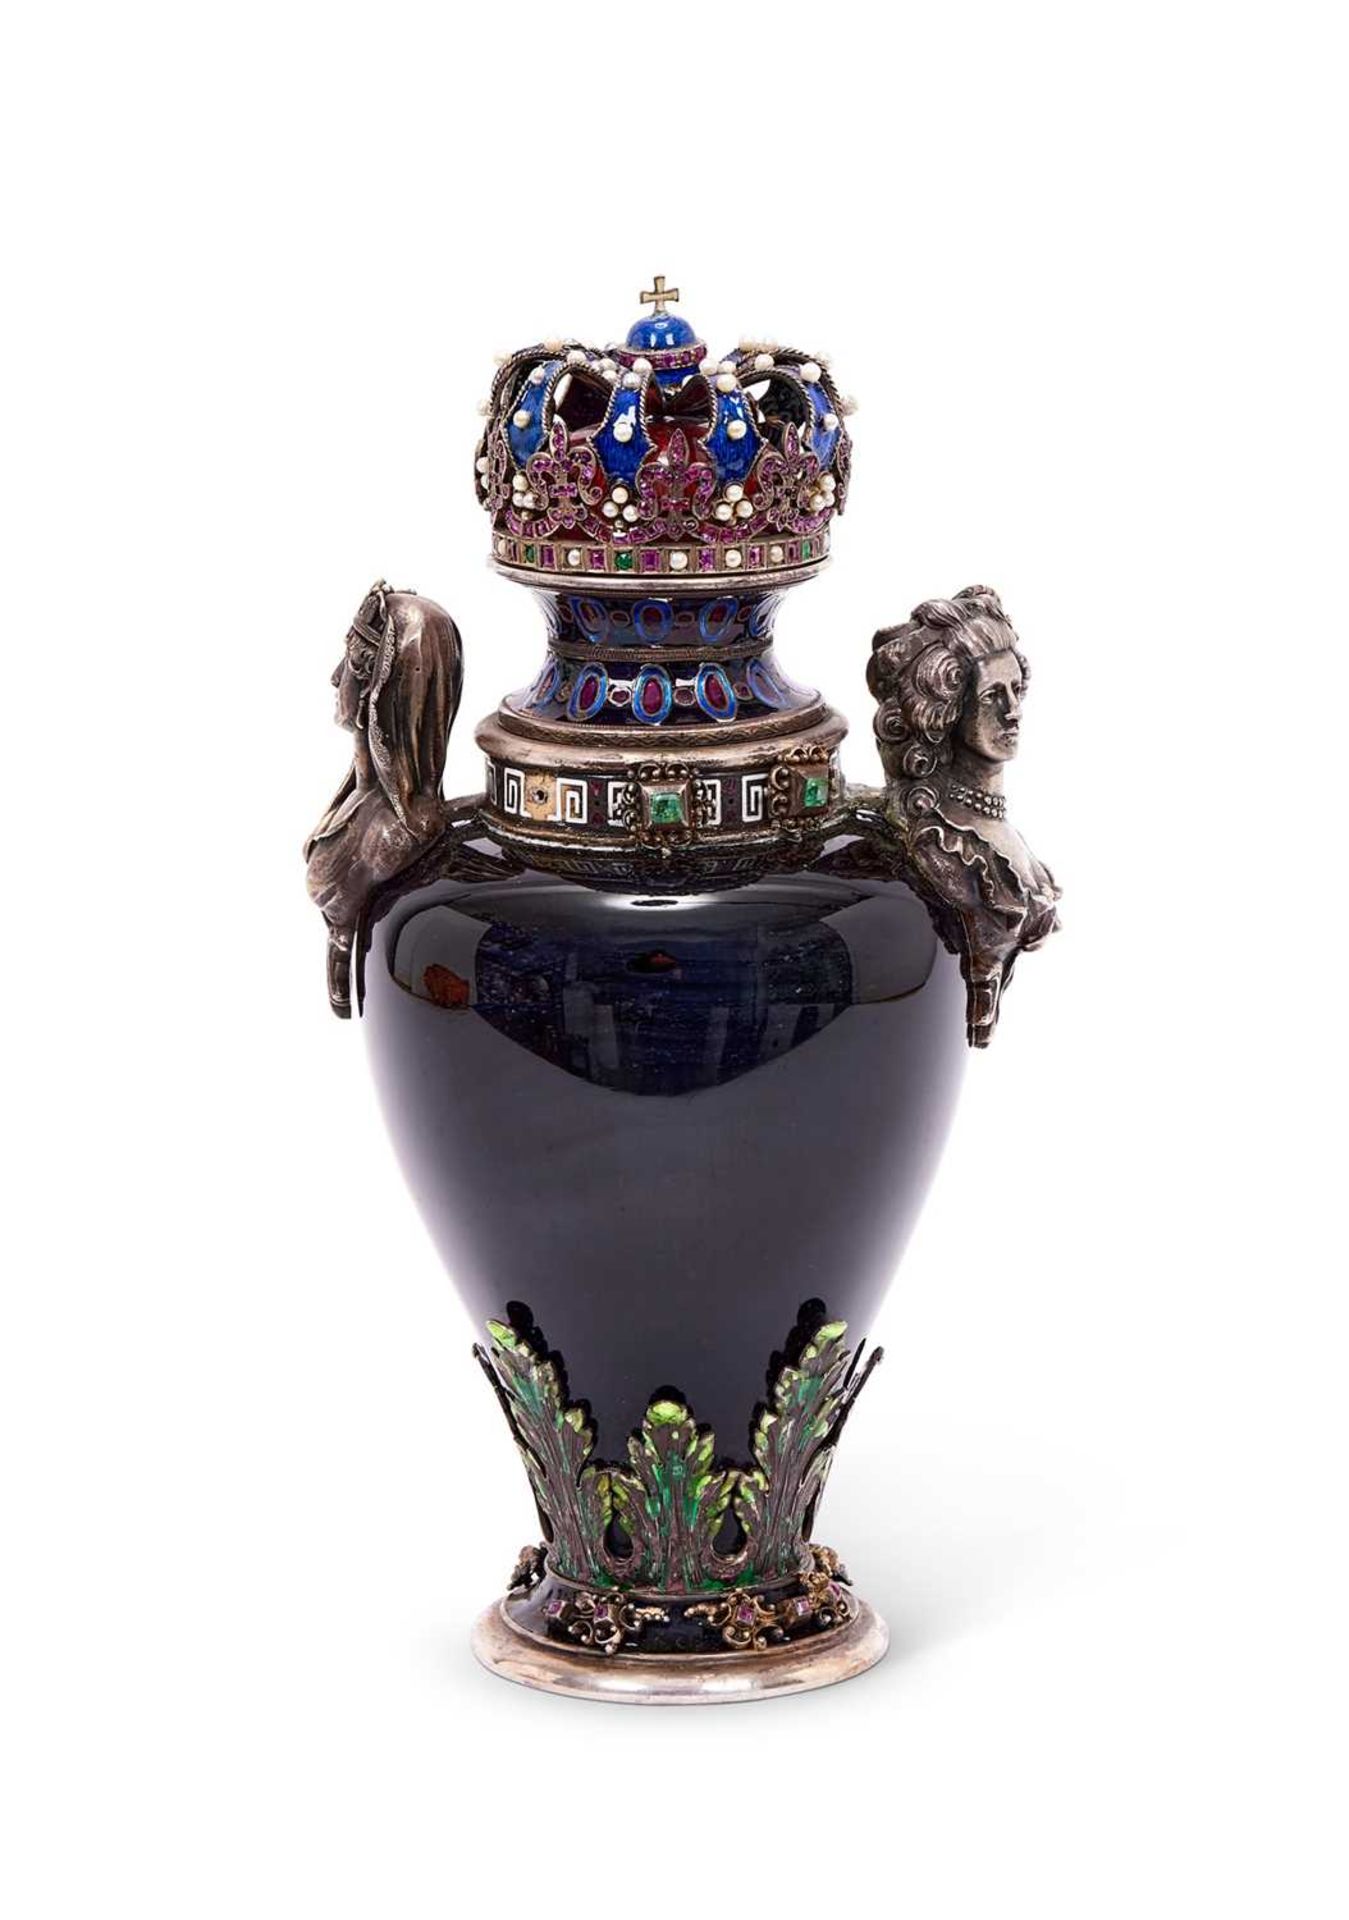 A FINE 19TH CENTURY VIENNESE ENAMEL, SILVER AND JEWELLED URN AND COVER OF ROYAL THEME - Image 2 of 12